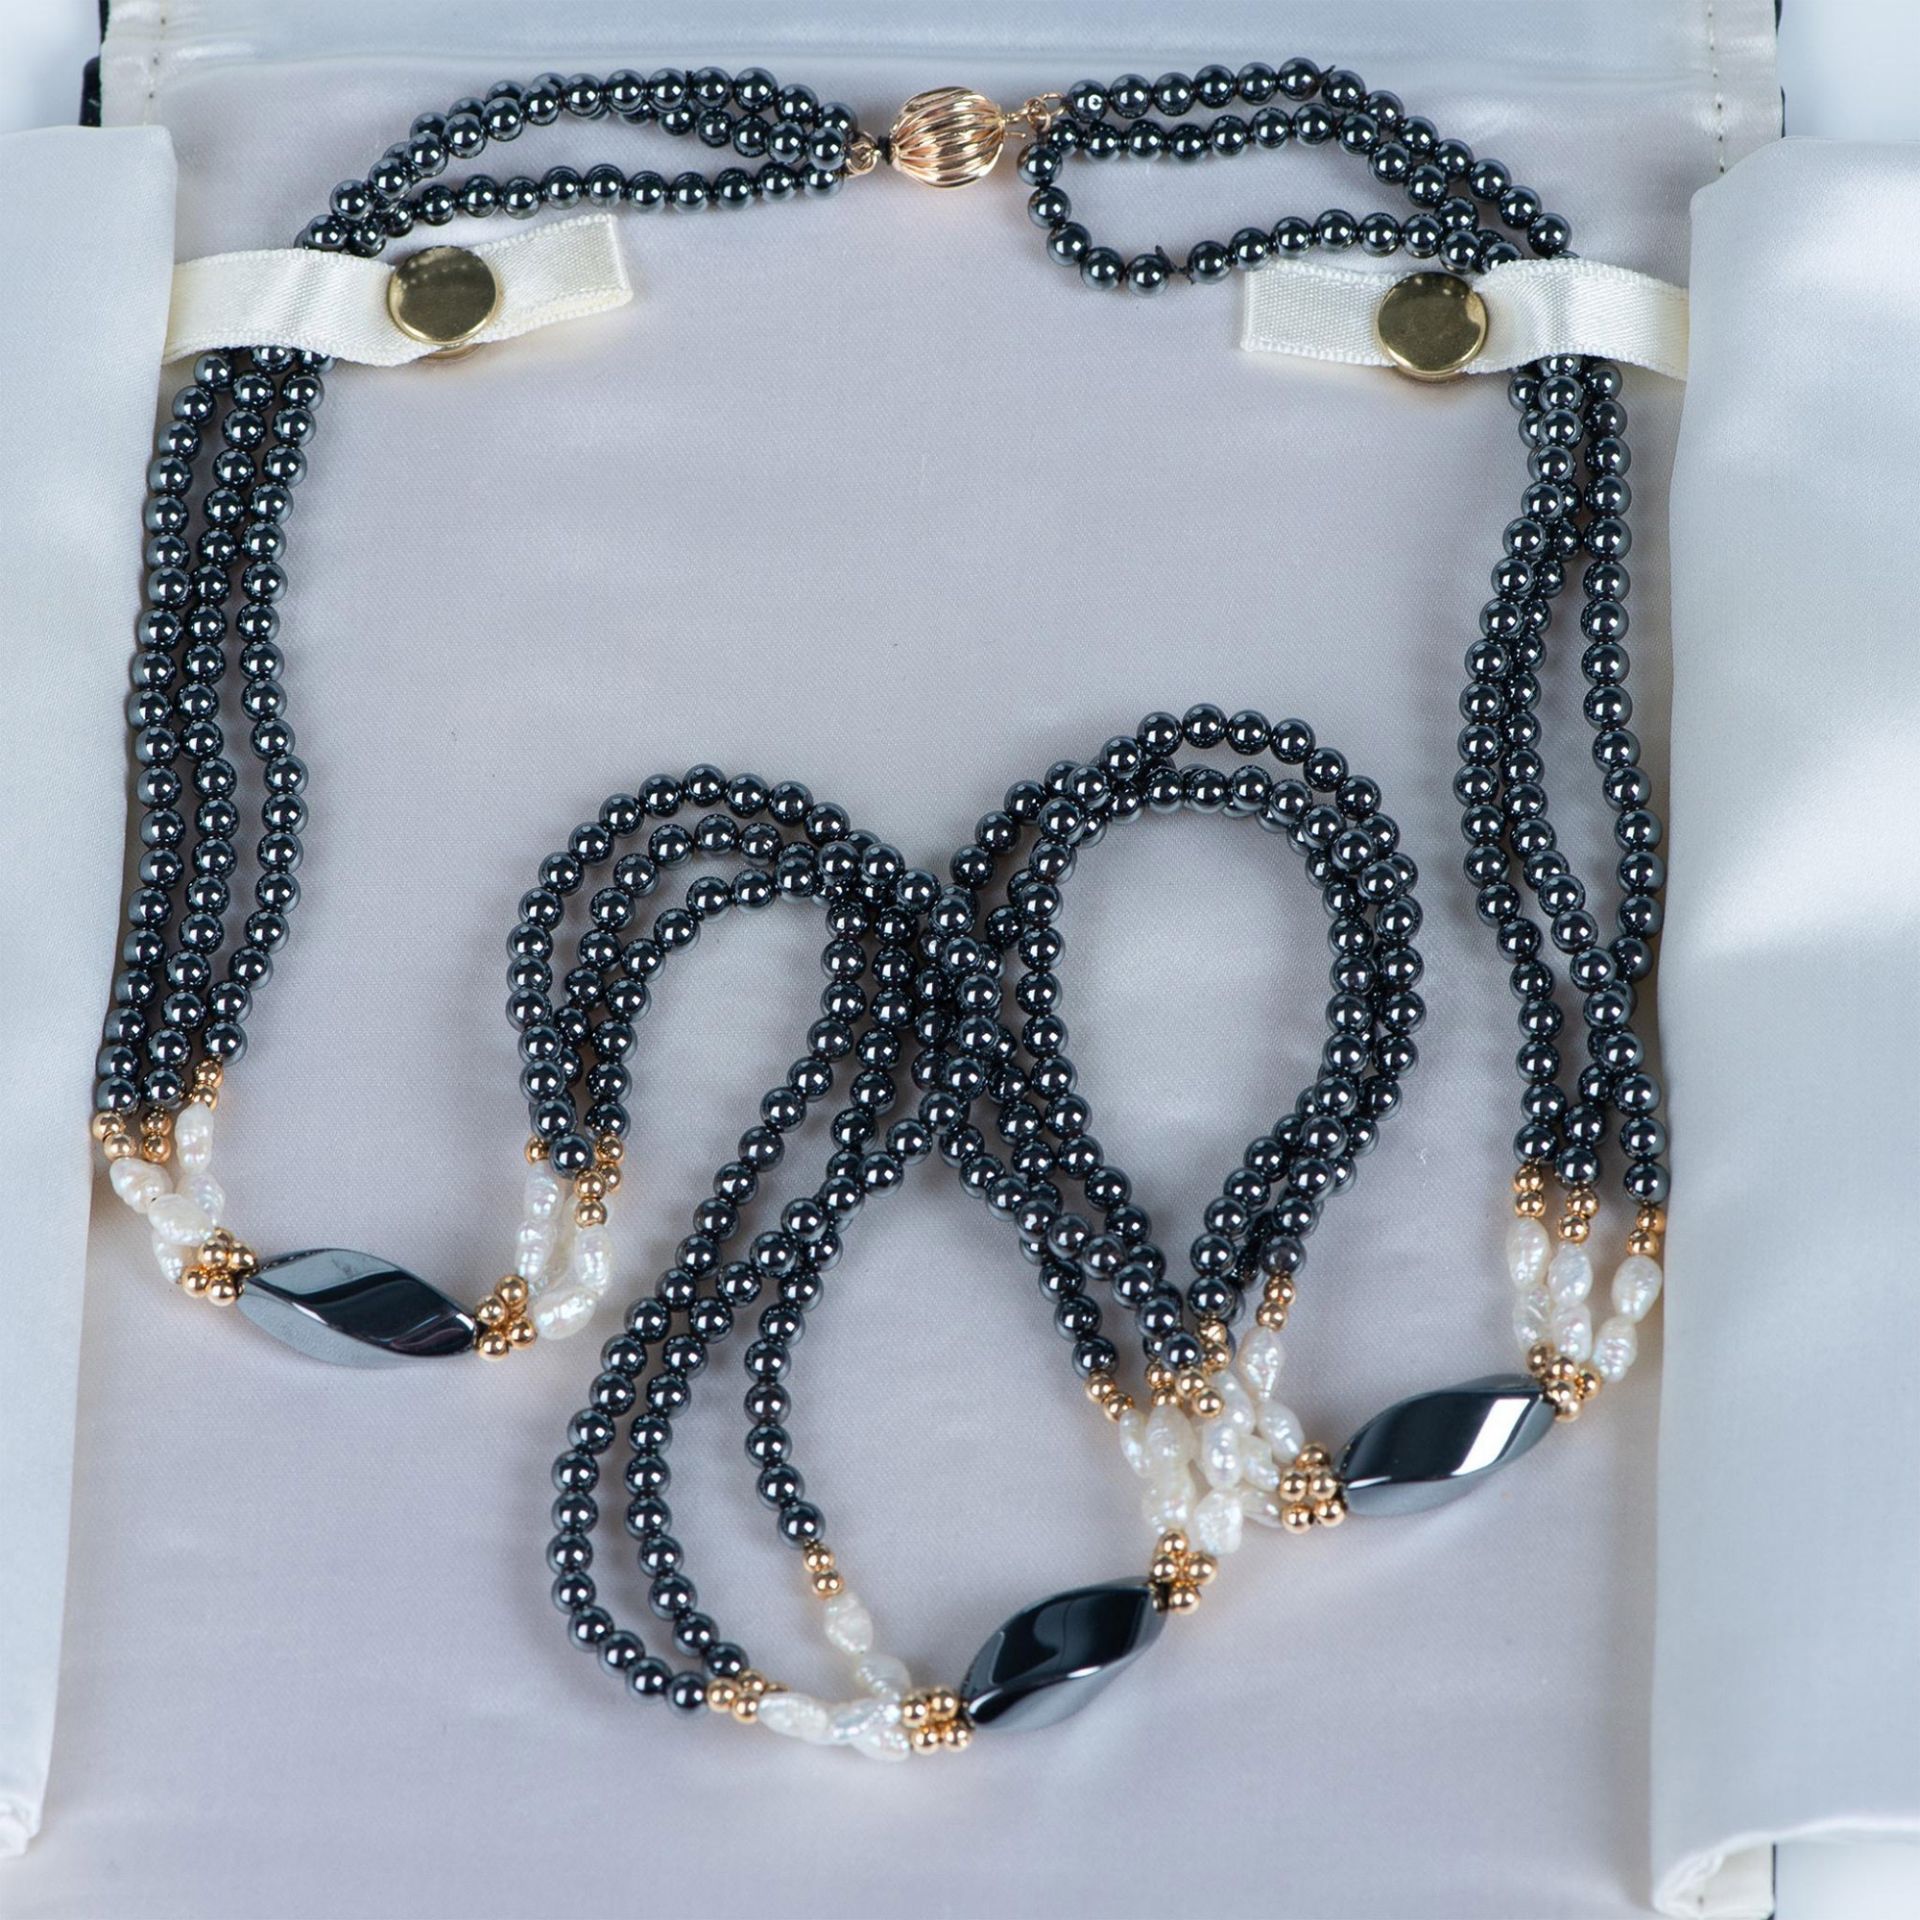 Black Onyx & Fresh Water Pearl Necklace - Image 7 of 7